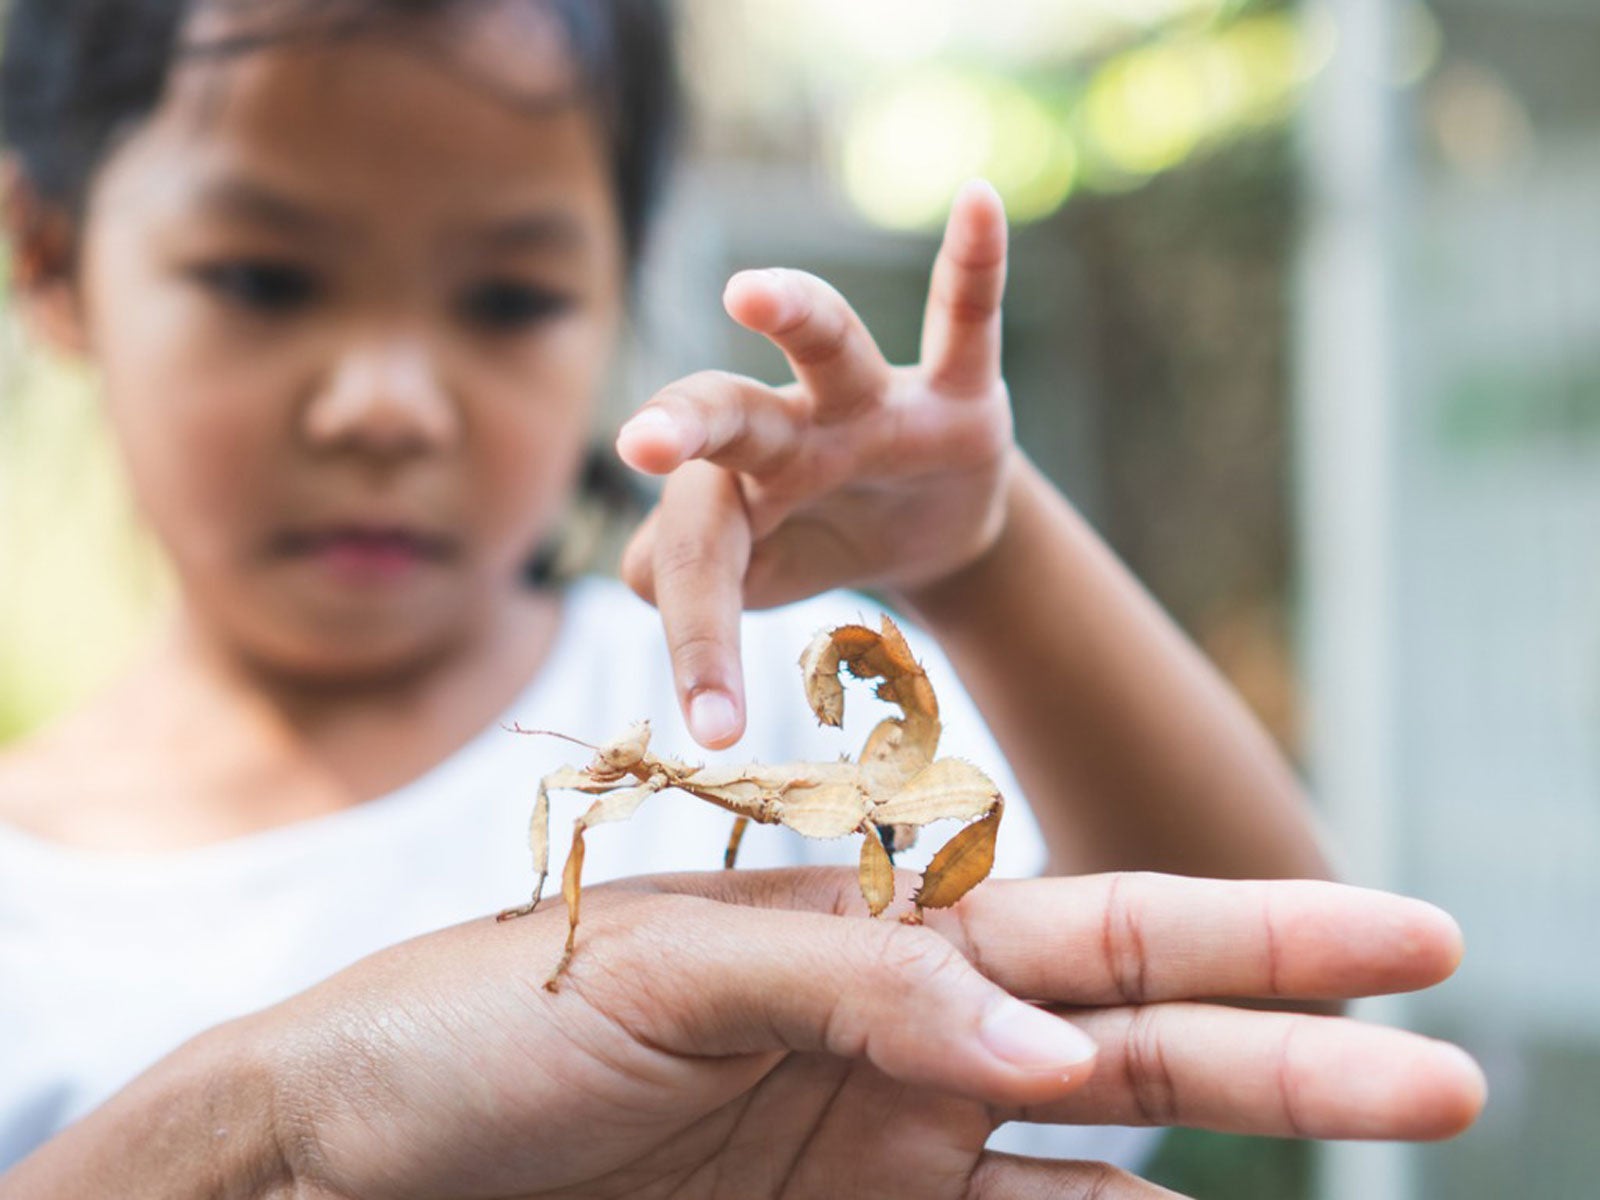 Lesson About Insects – Teaching Kids About Bugs In The Garden